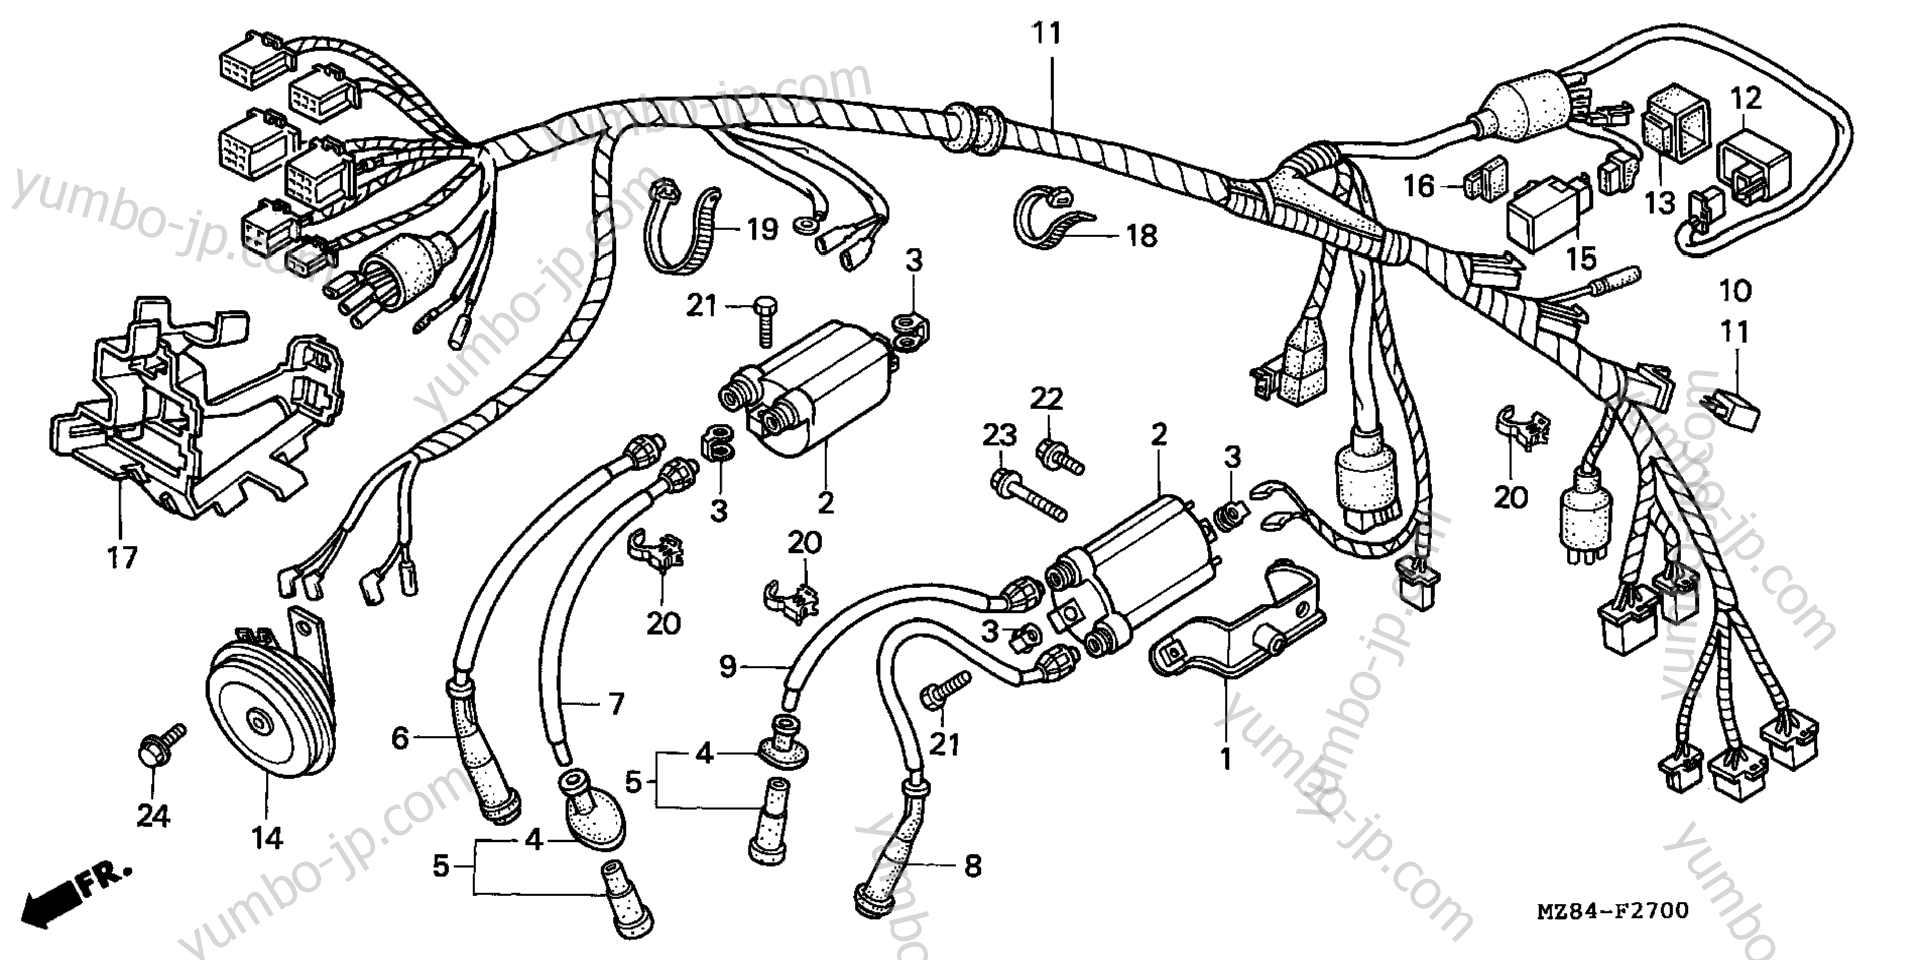 WIRE HARNESS for motorcycles HONDA VT600C A 1996 year